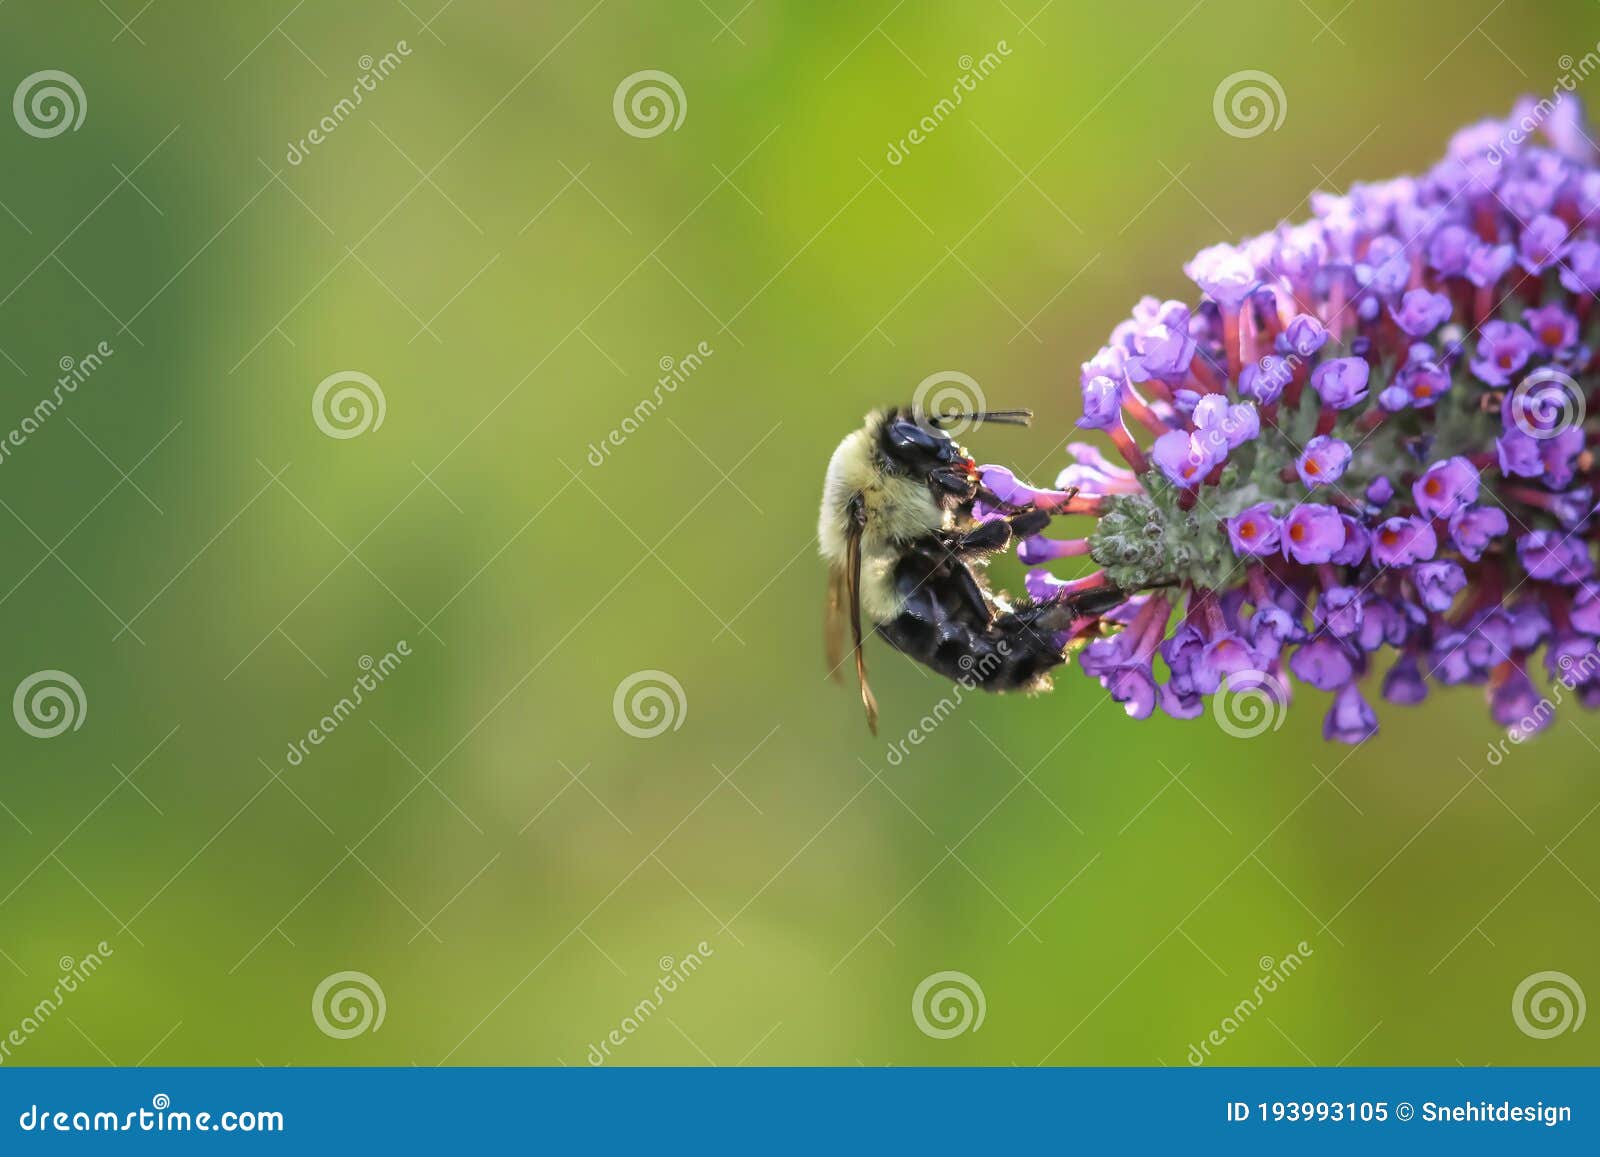 bee collecting pollen at flowers